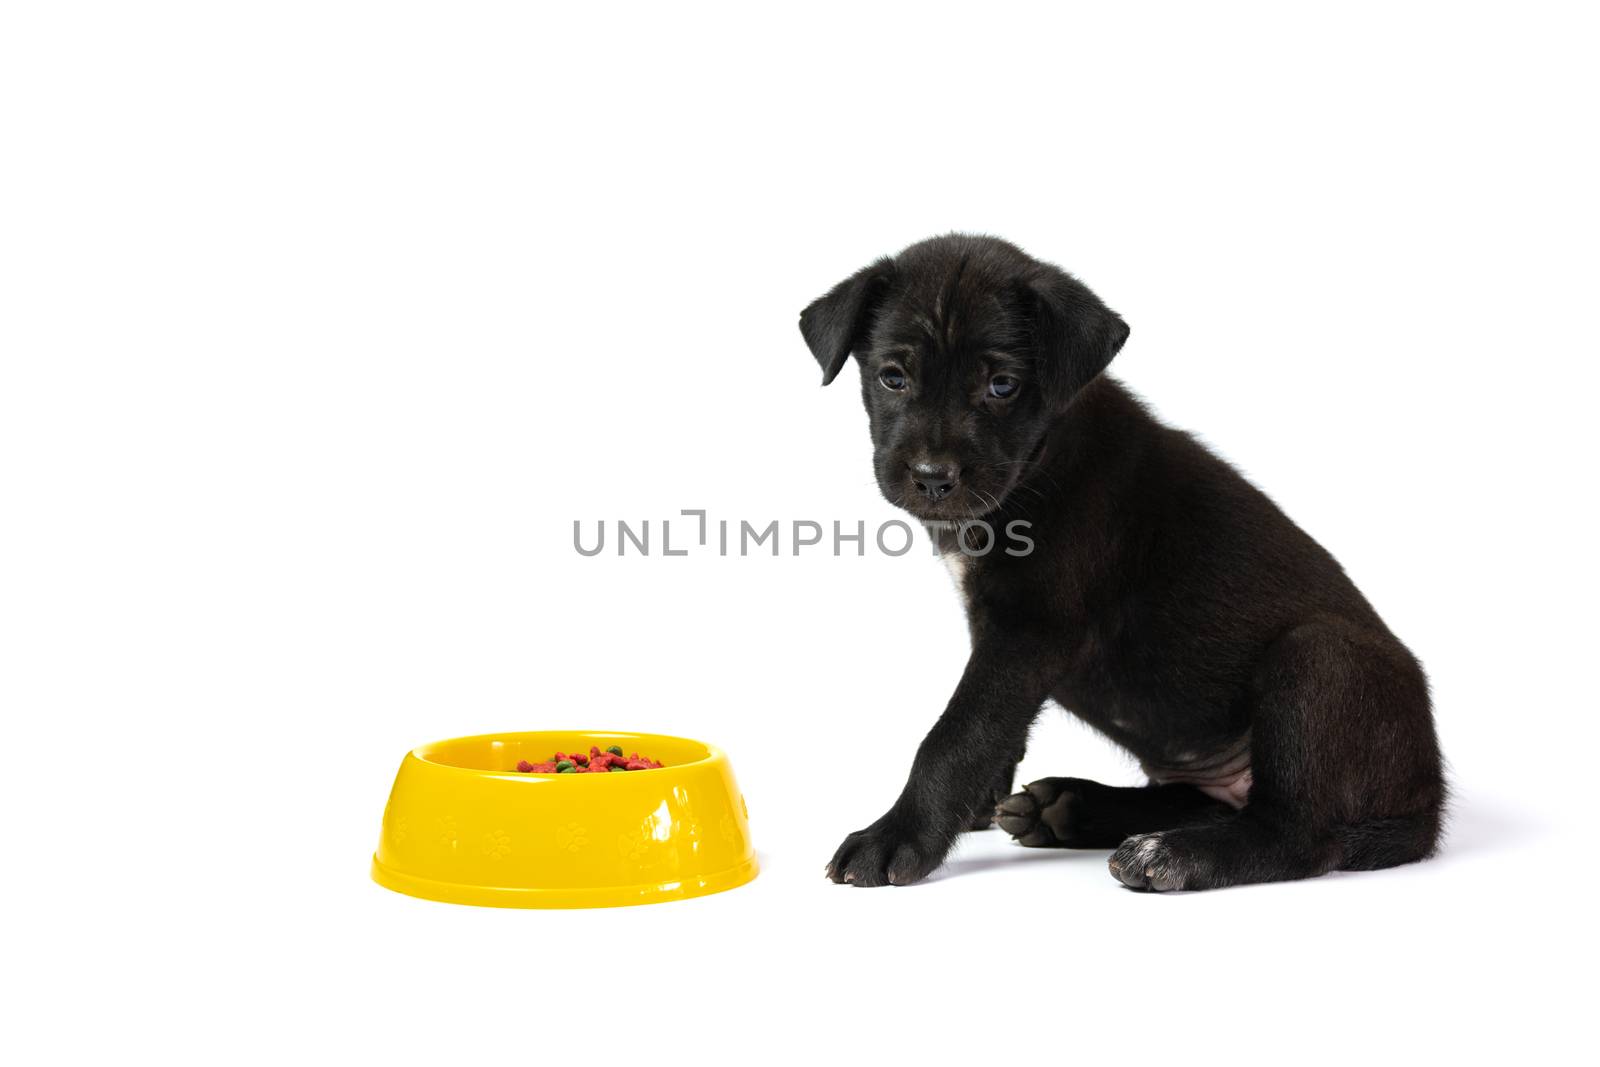 Cute small dog with bowl of dog food isolated on white background. Pets is feeding concept.